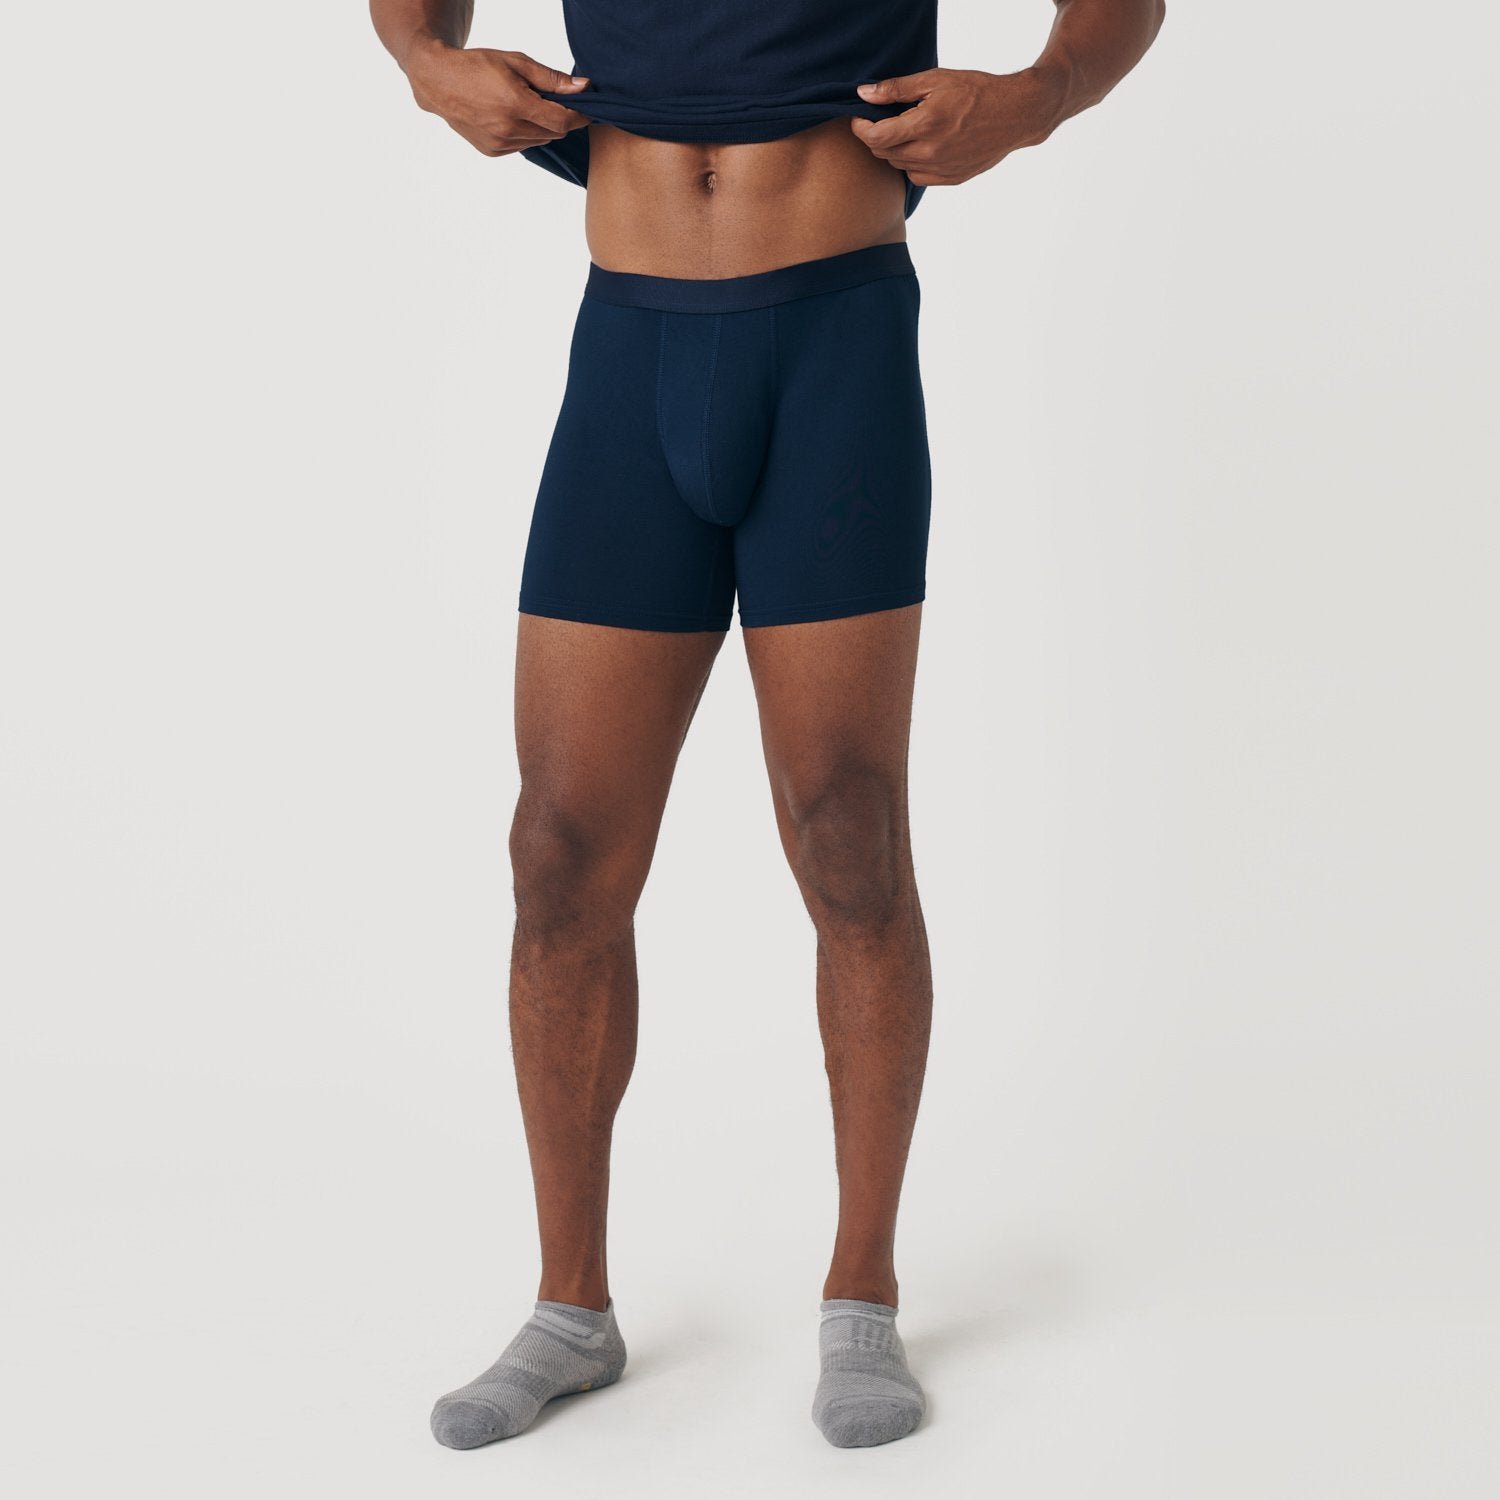 Combo Boxer Briefs 6-Pack